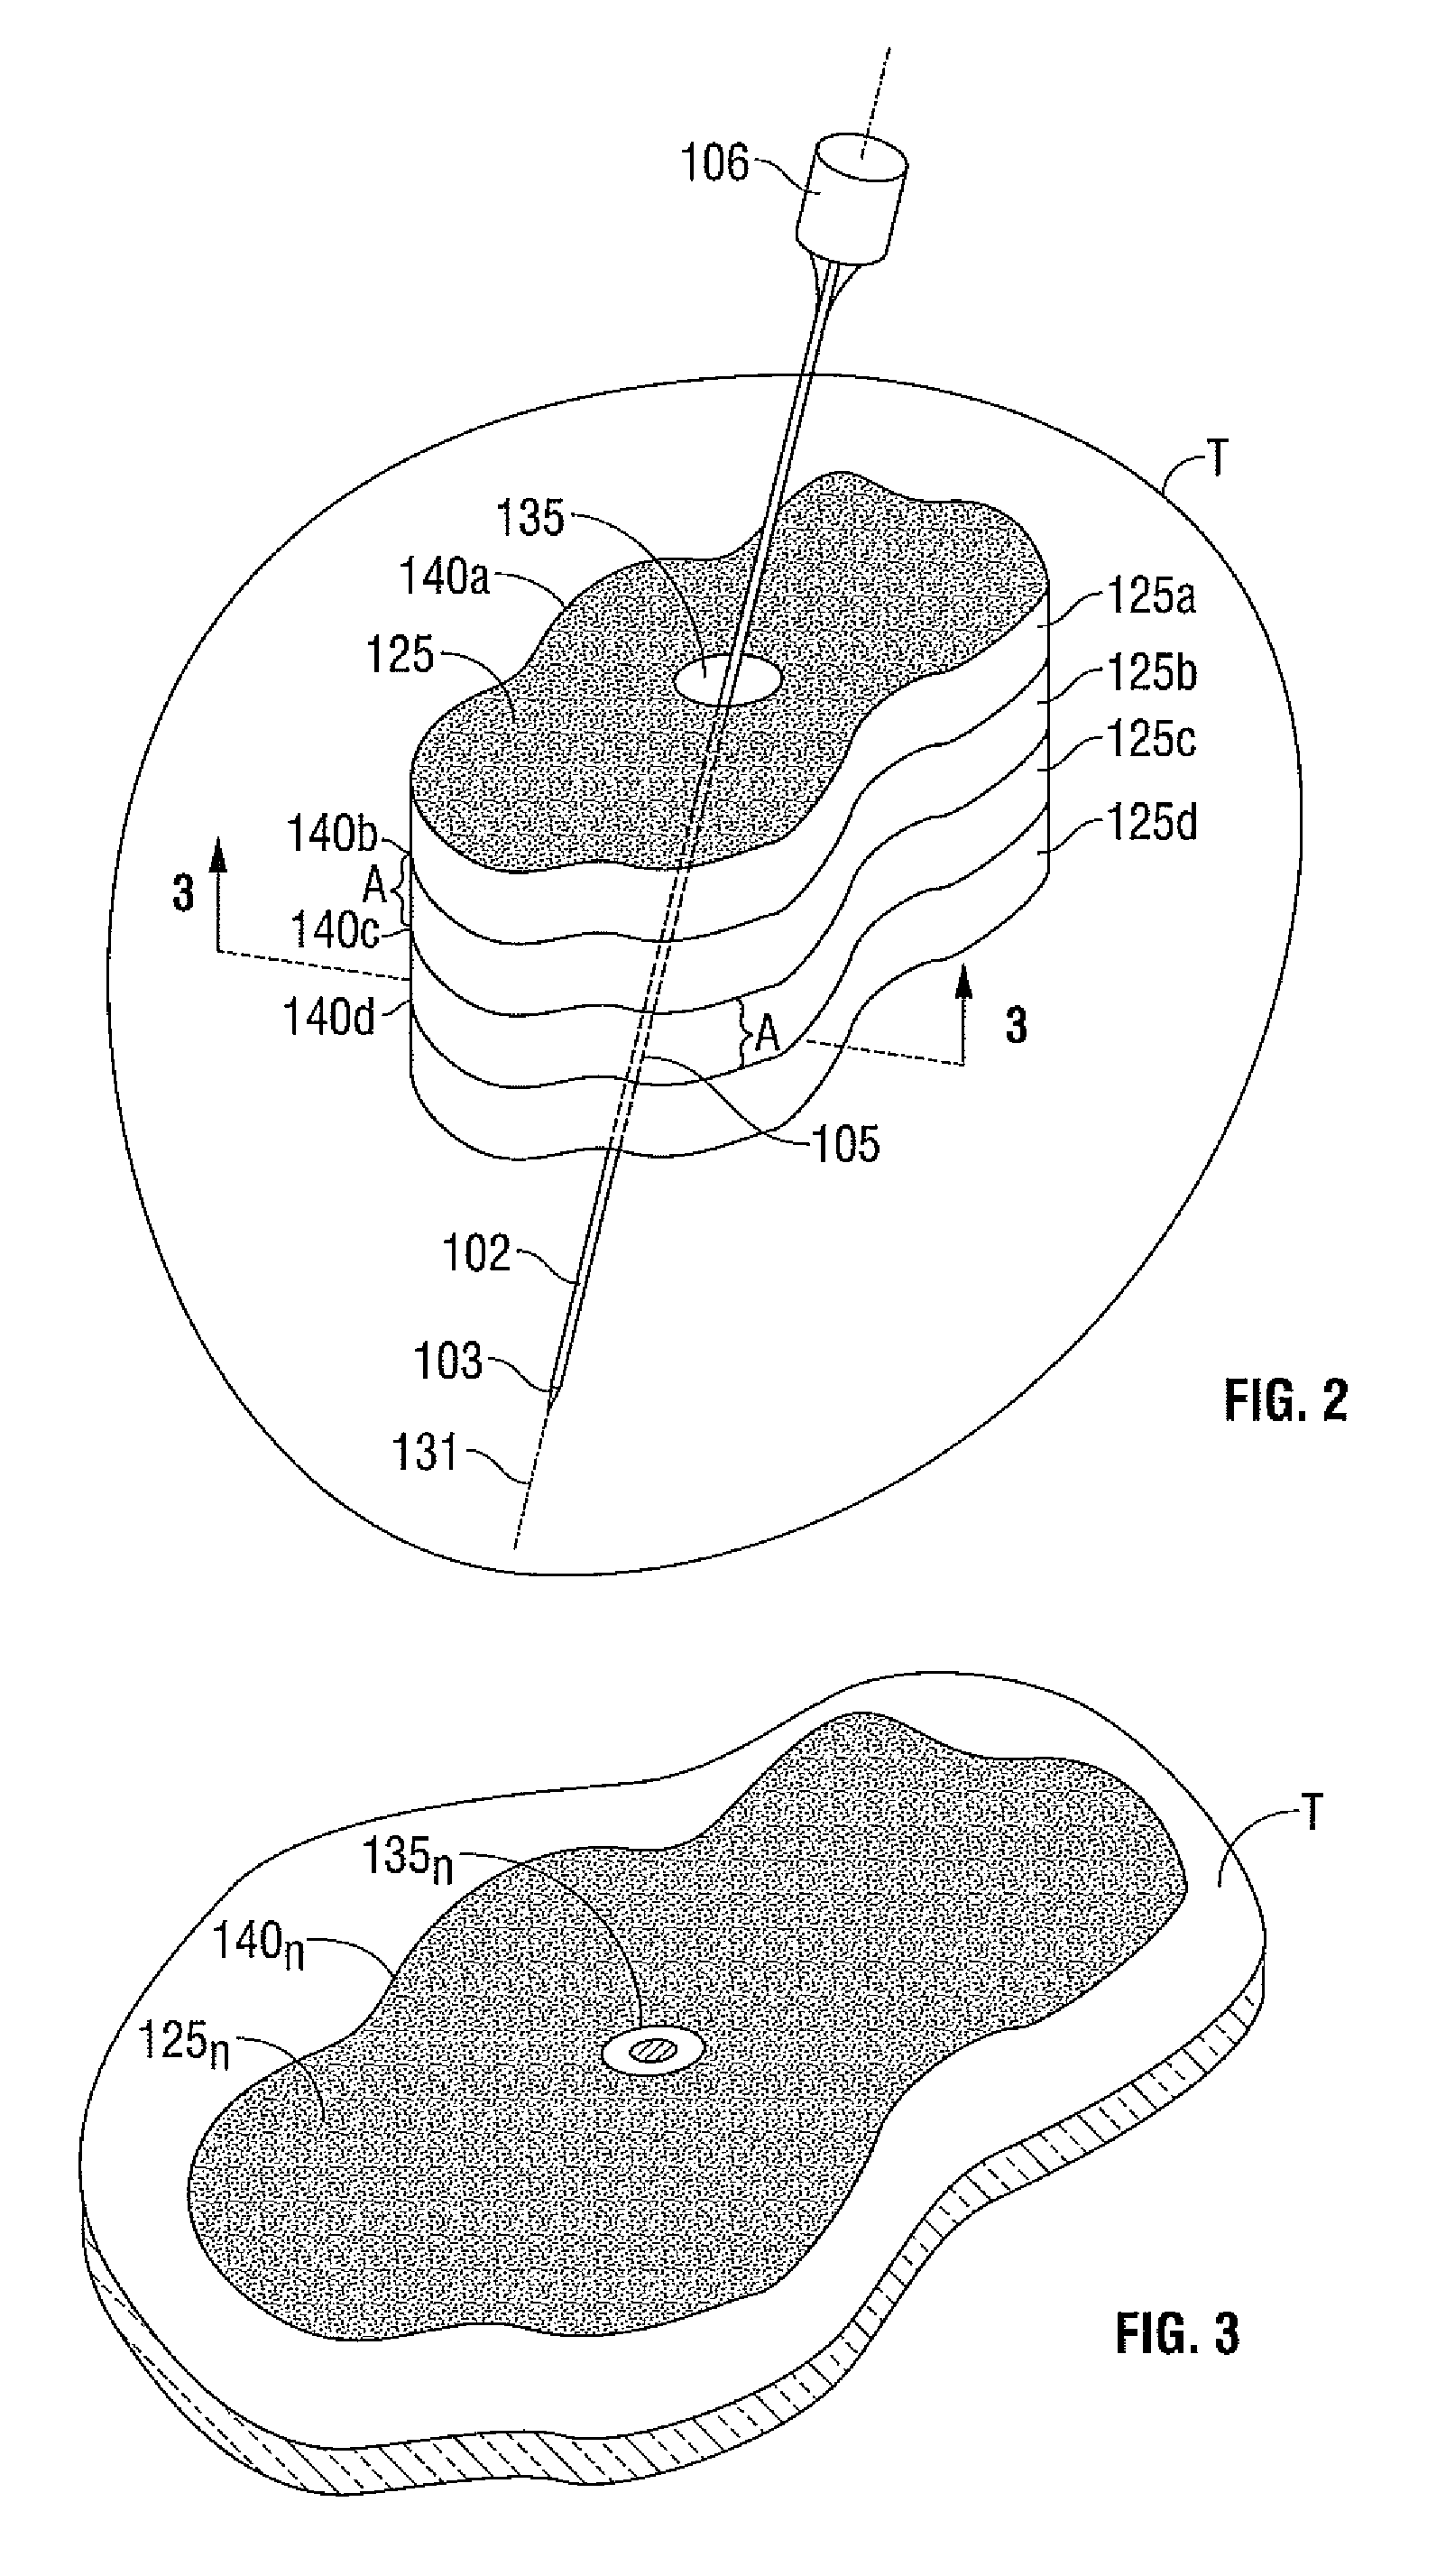 Method for ablation volume determination and geometric reconstruction